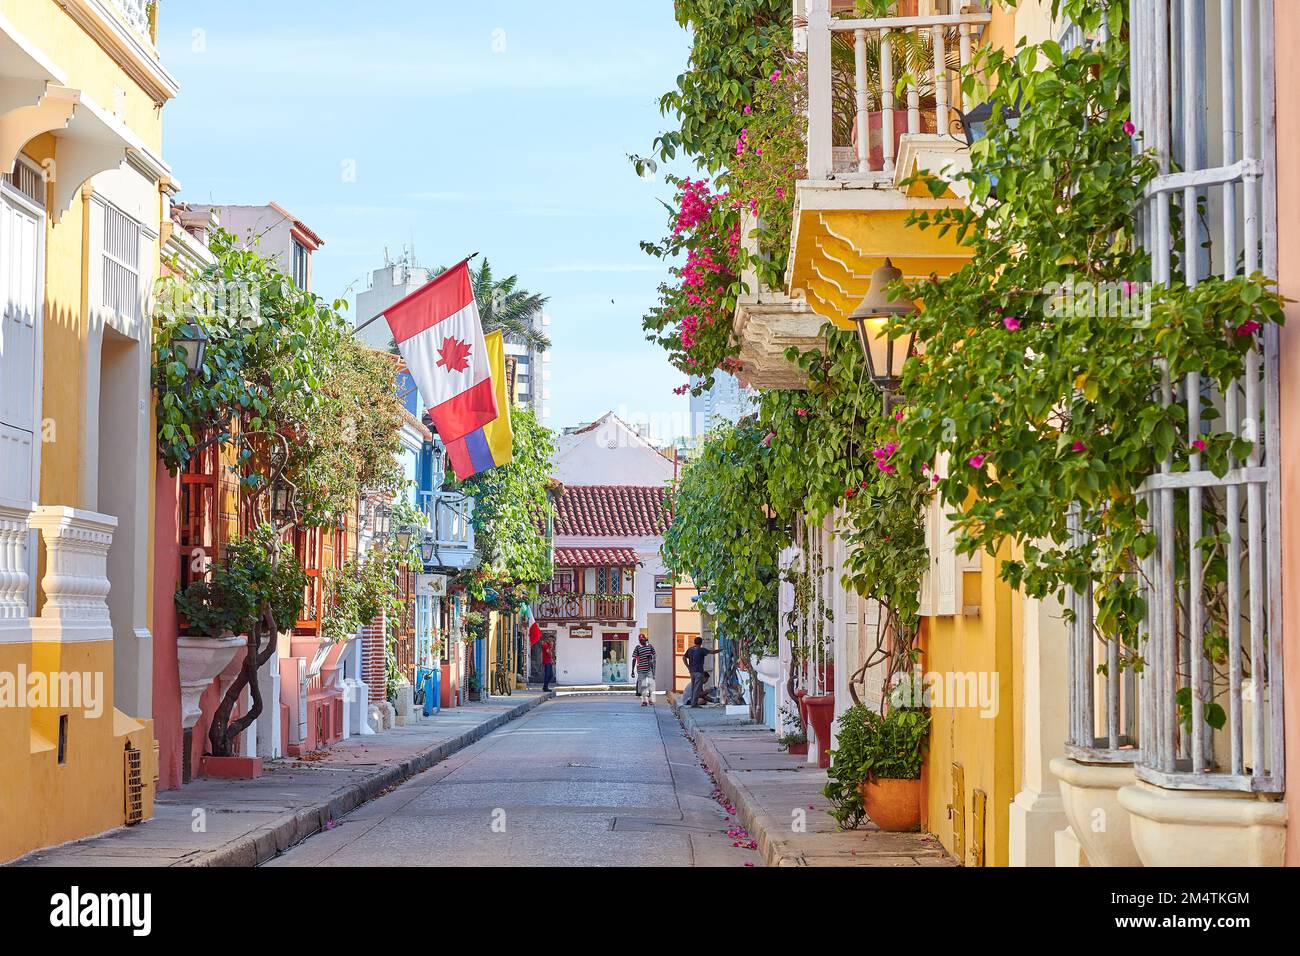 A regular footage of a street in Cartagena with beautiful houses decorated with plants and flags Stock Photo